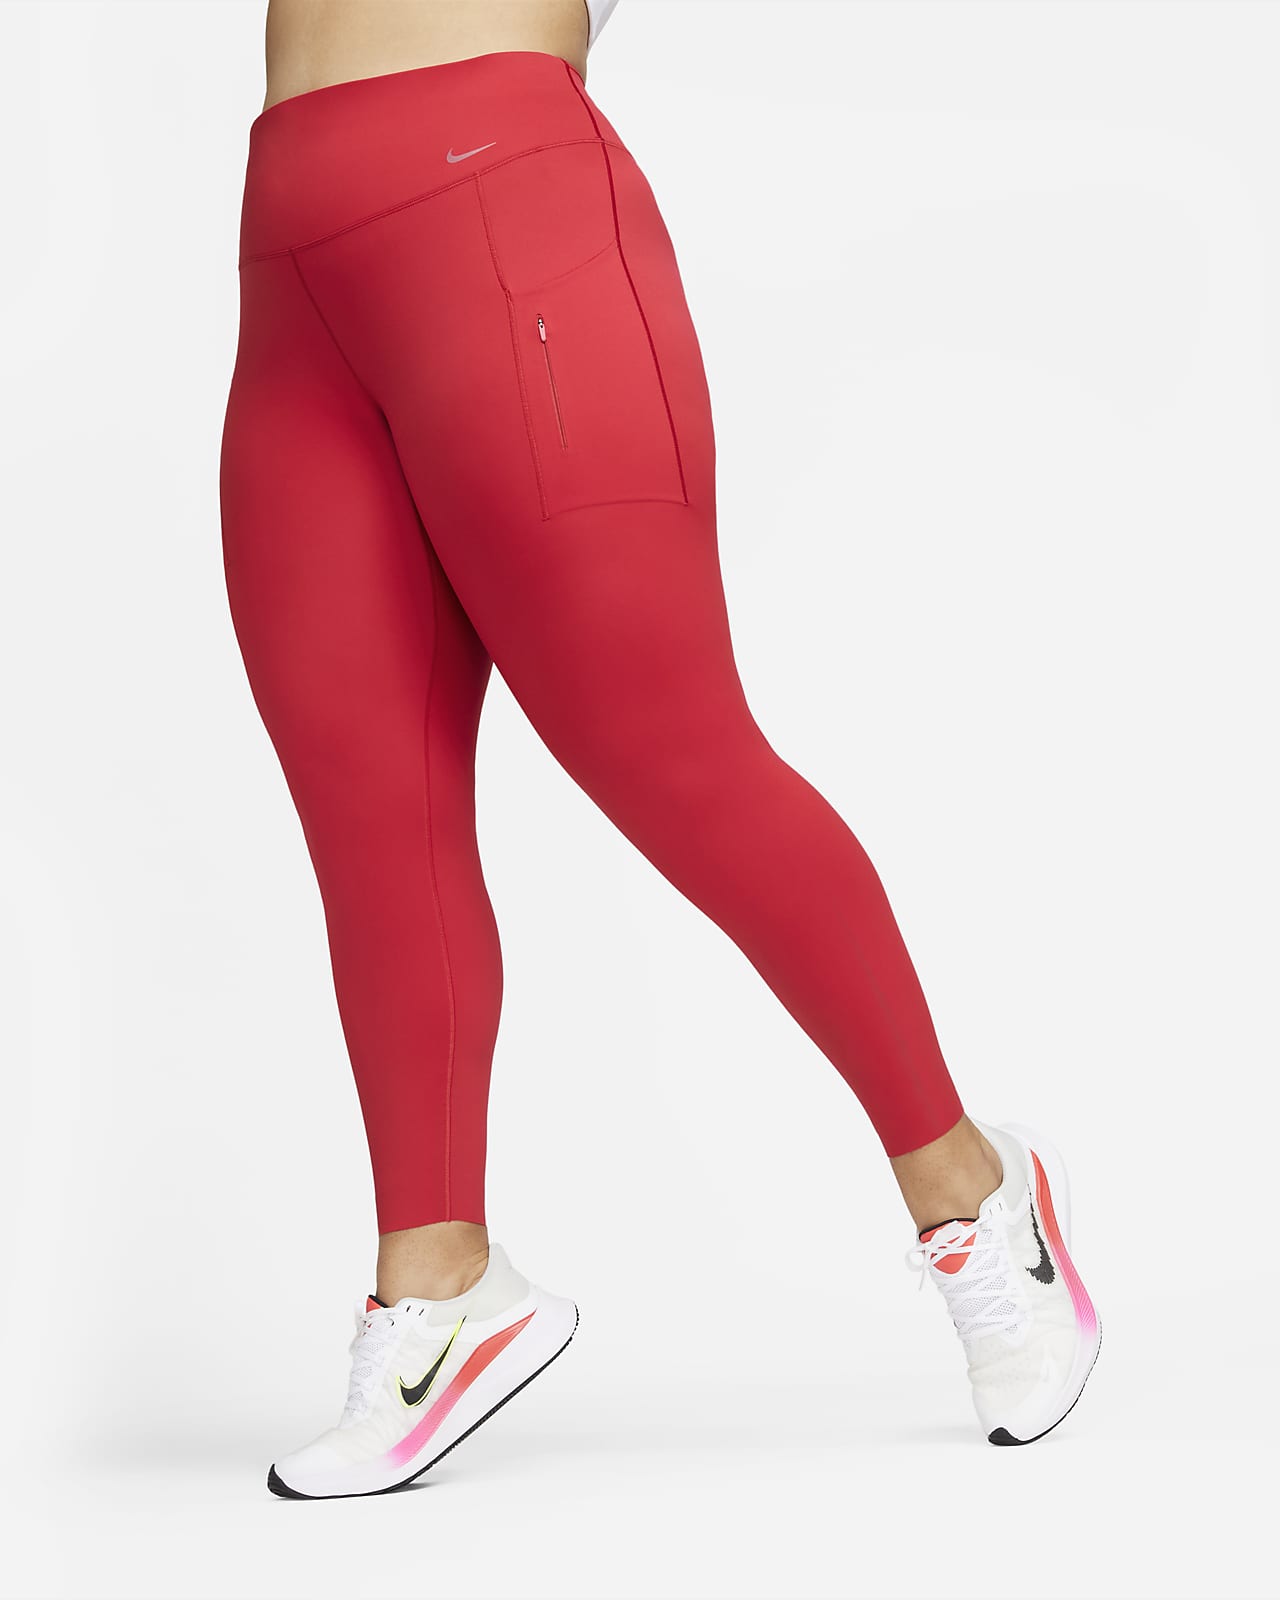 Fhine Women Buttery Soft Warm Workout Gym Running Basic Yoga Pants Full  Length with Pocket Peach Brushed Leggings, Red Wine, 1X : Buy Online at  Best Price in KSA - Souq is